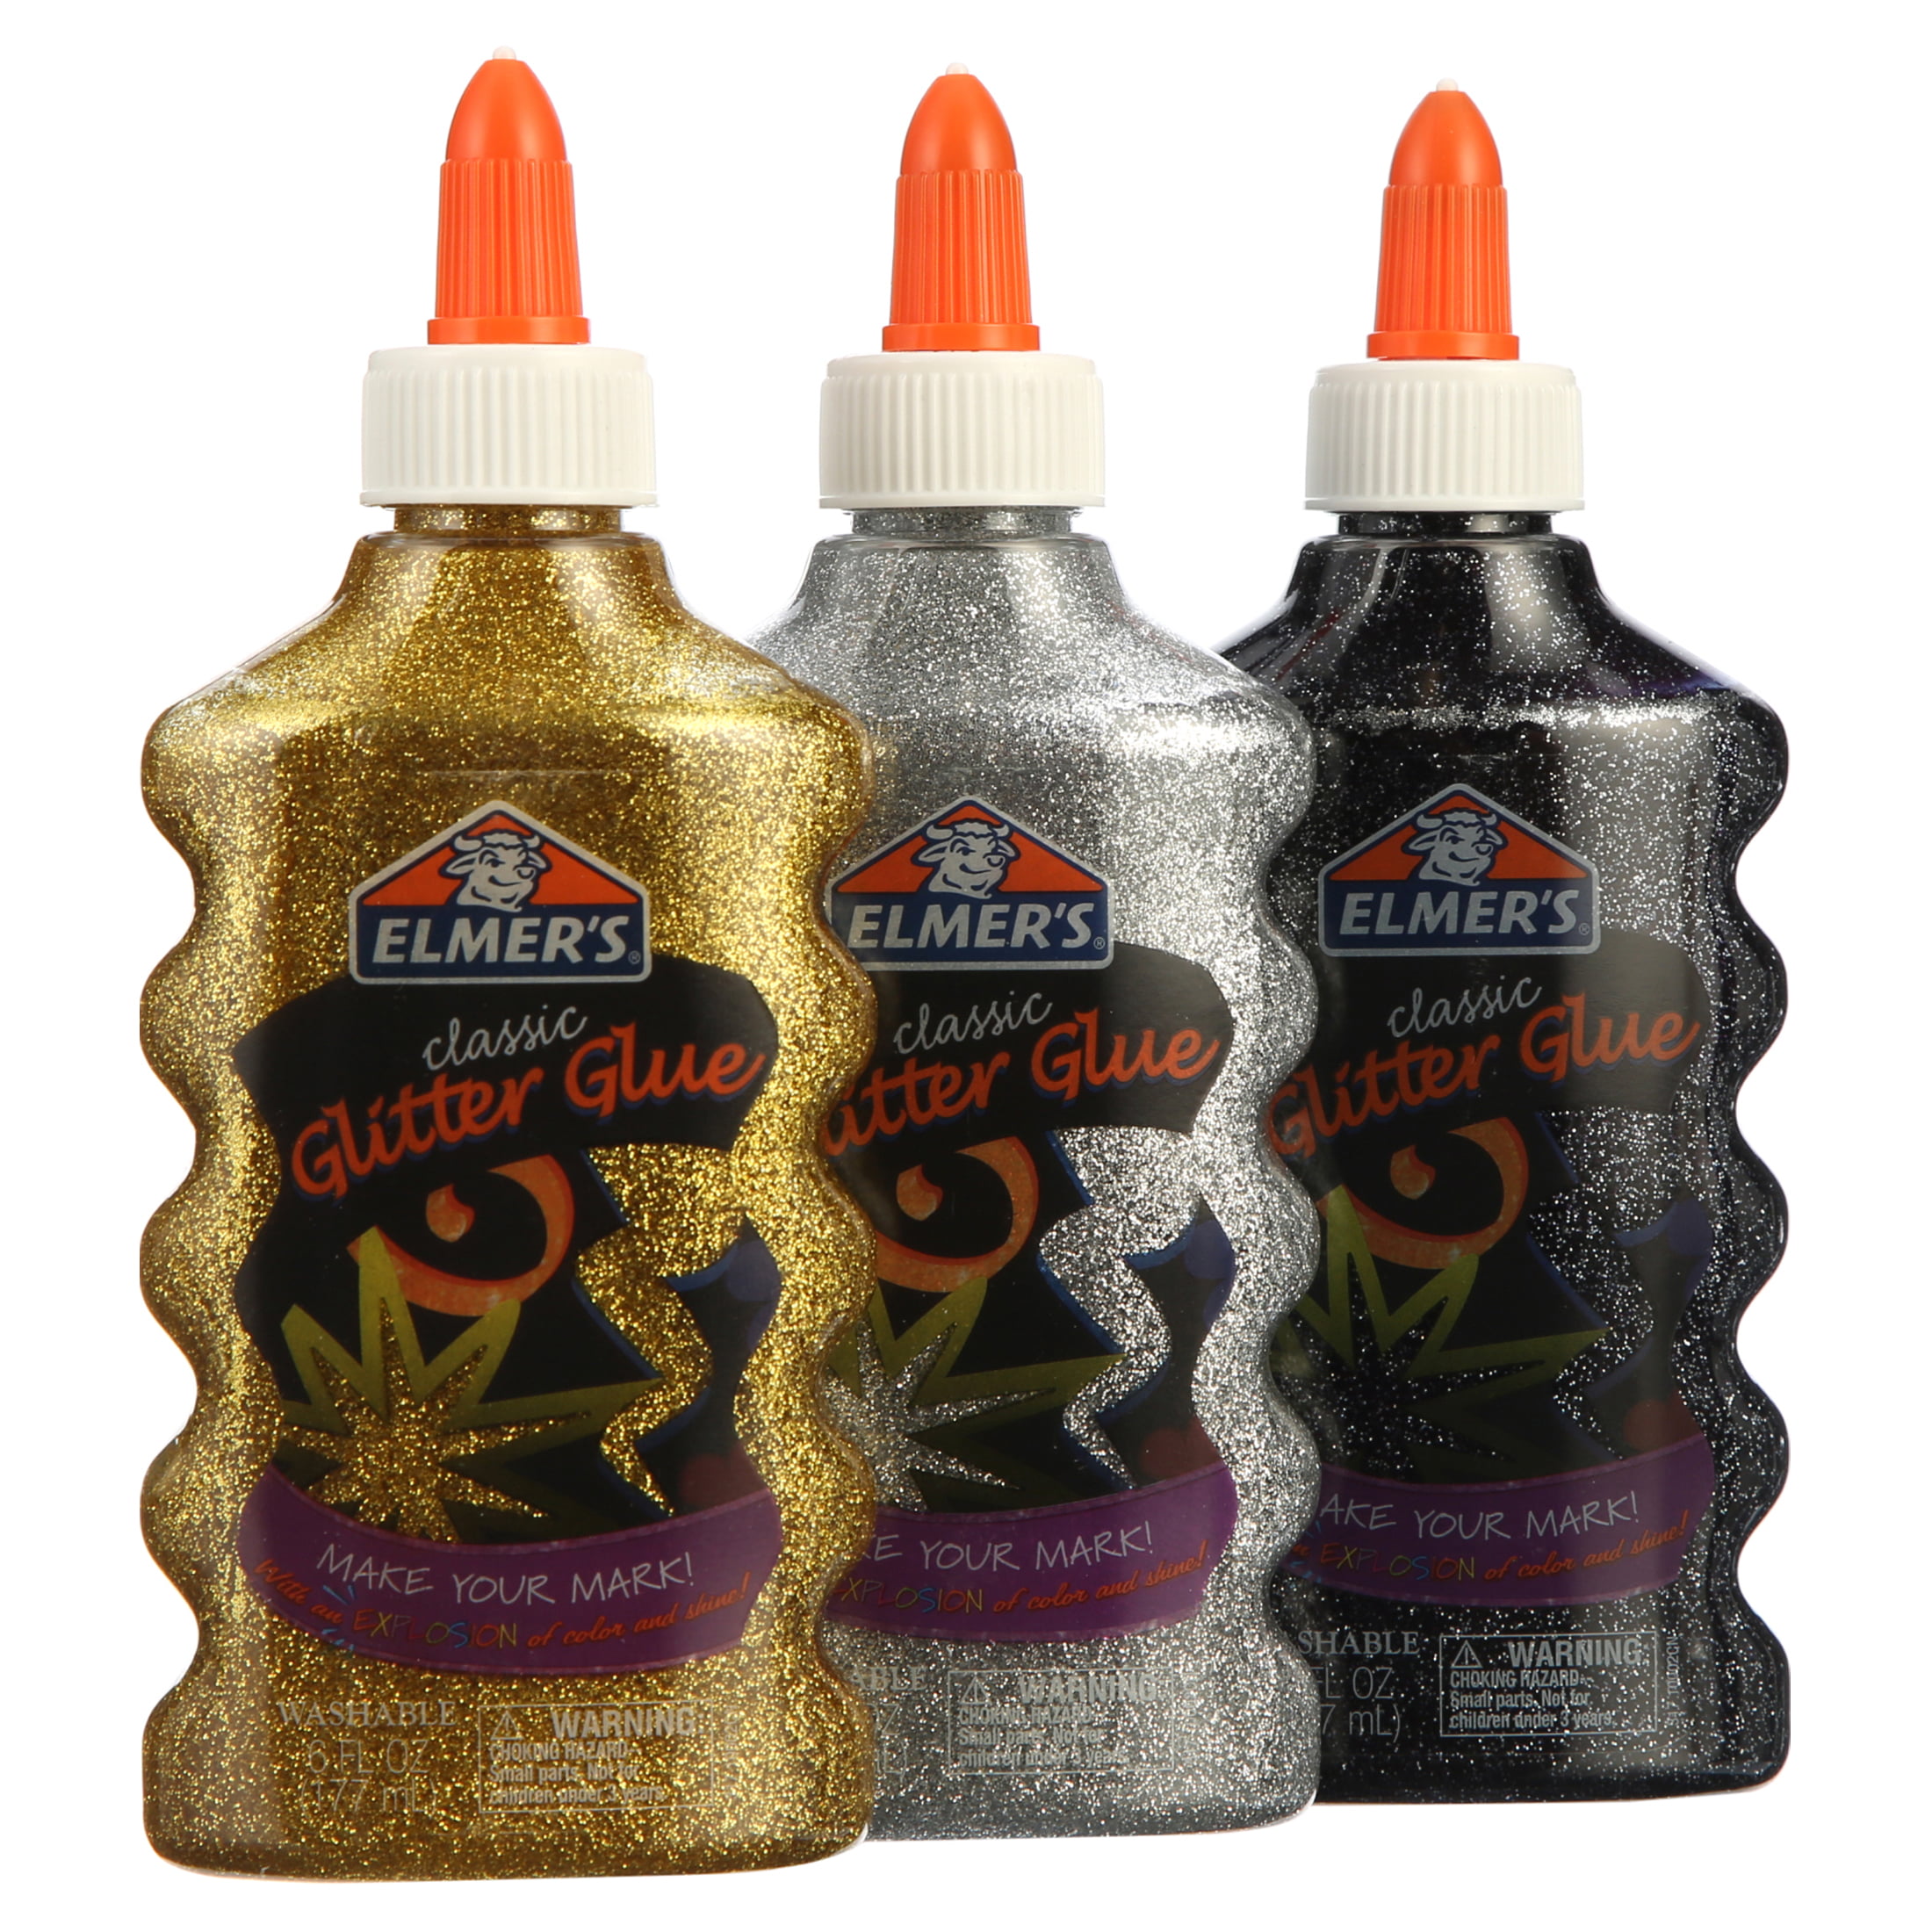 Elmers Glitter n' Glue Thanksgiving Candle - Whipperberry